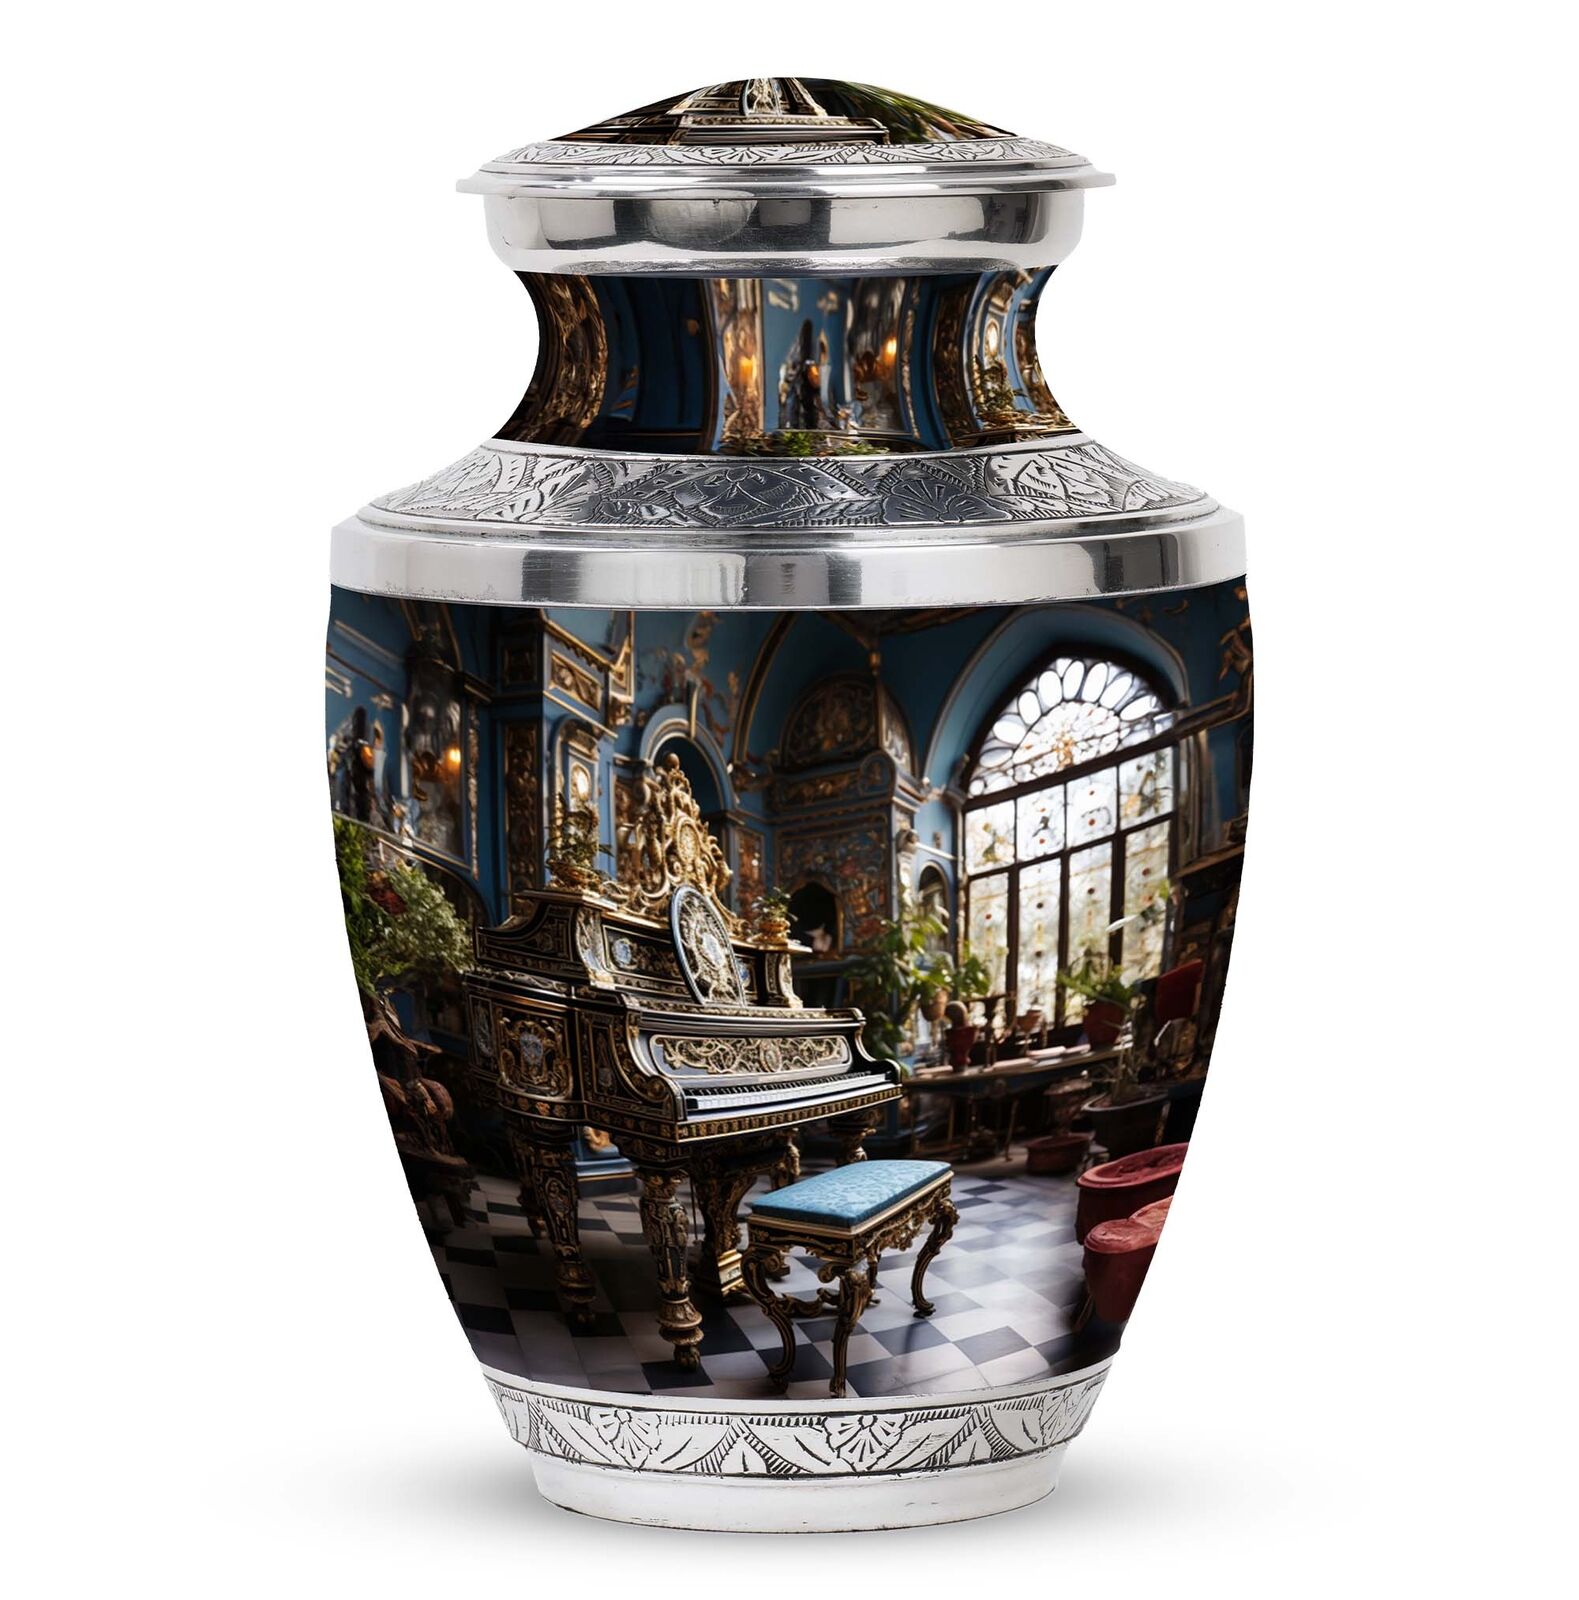 Ornate Baroque Piano in Luxurious Setting Large Cremation Adult Urns 200 cu In